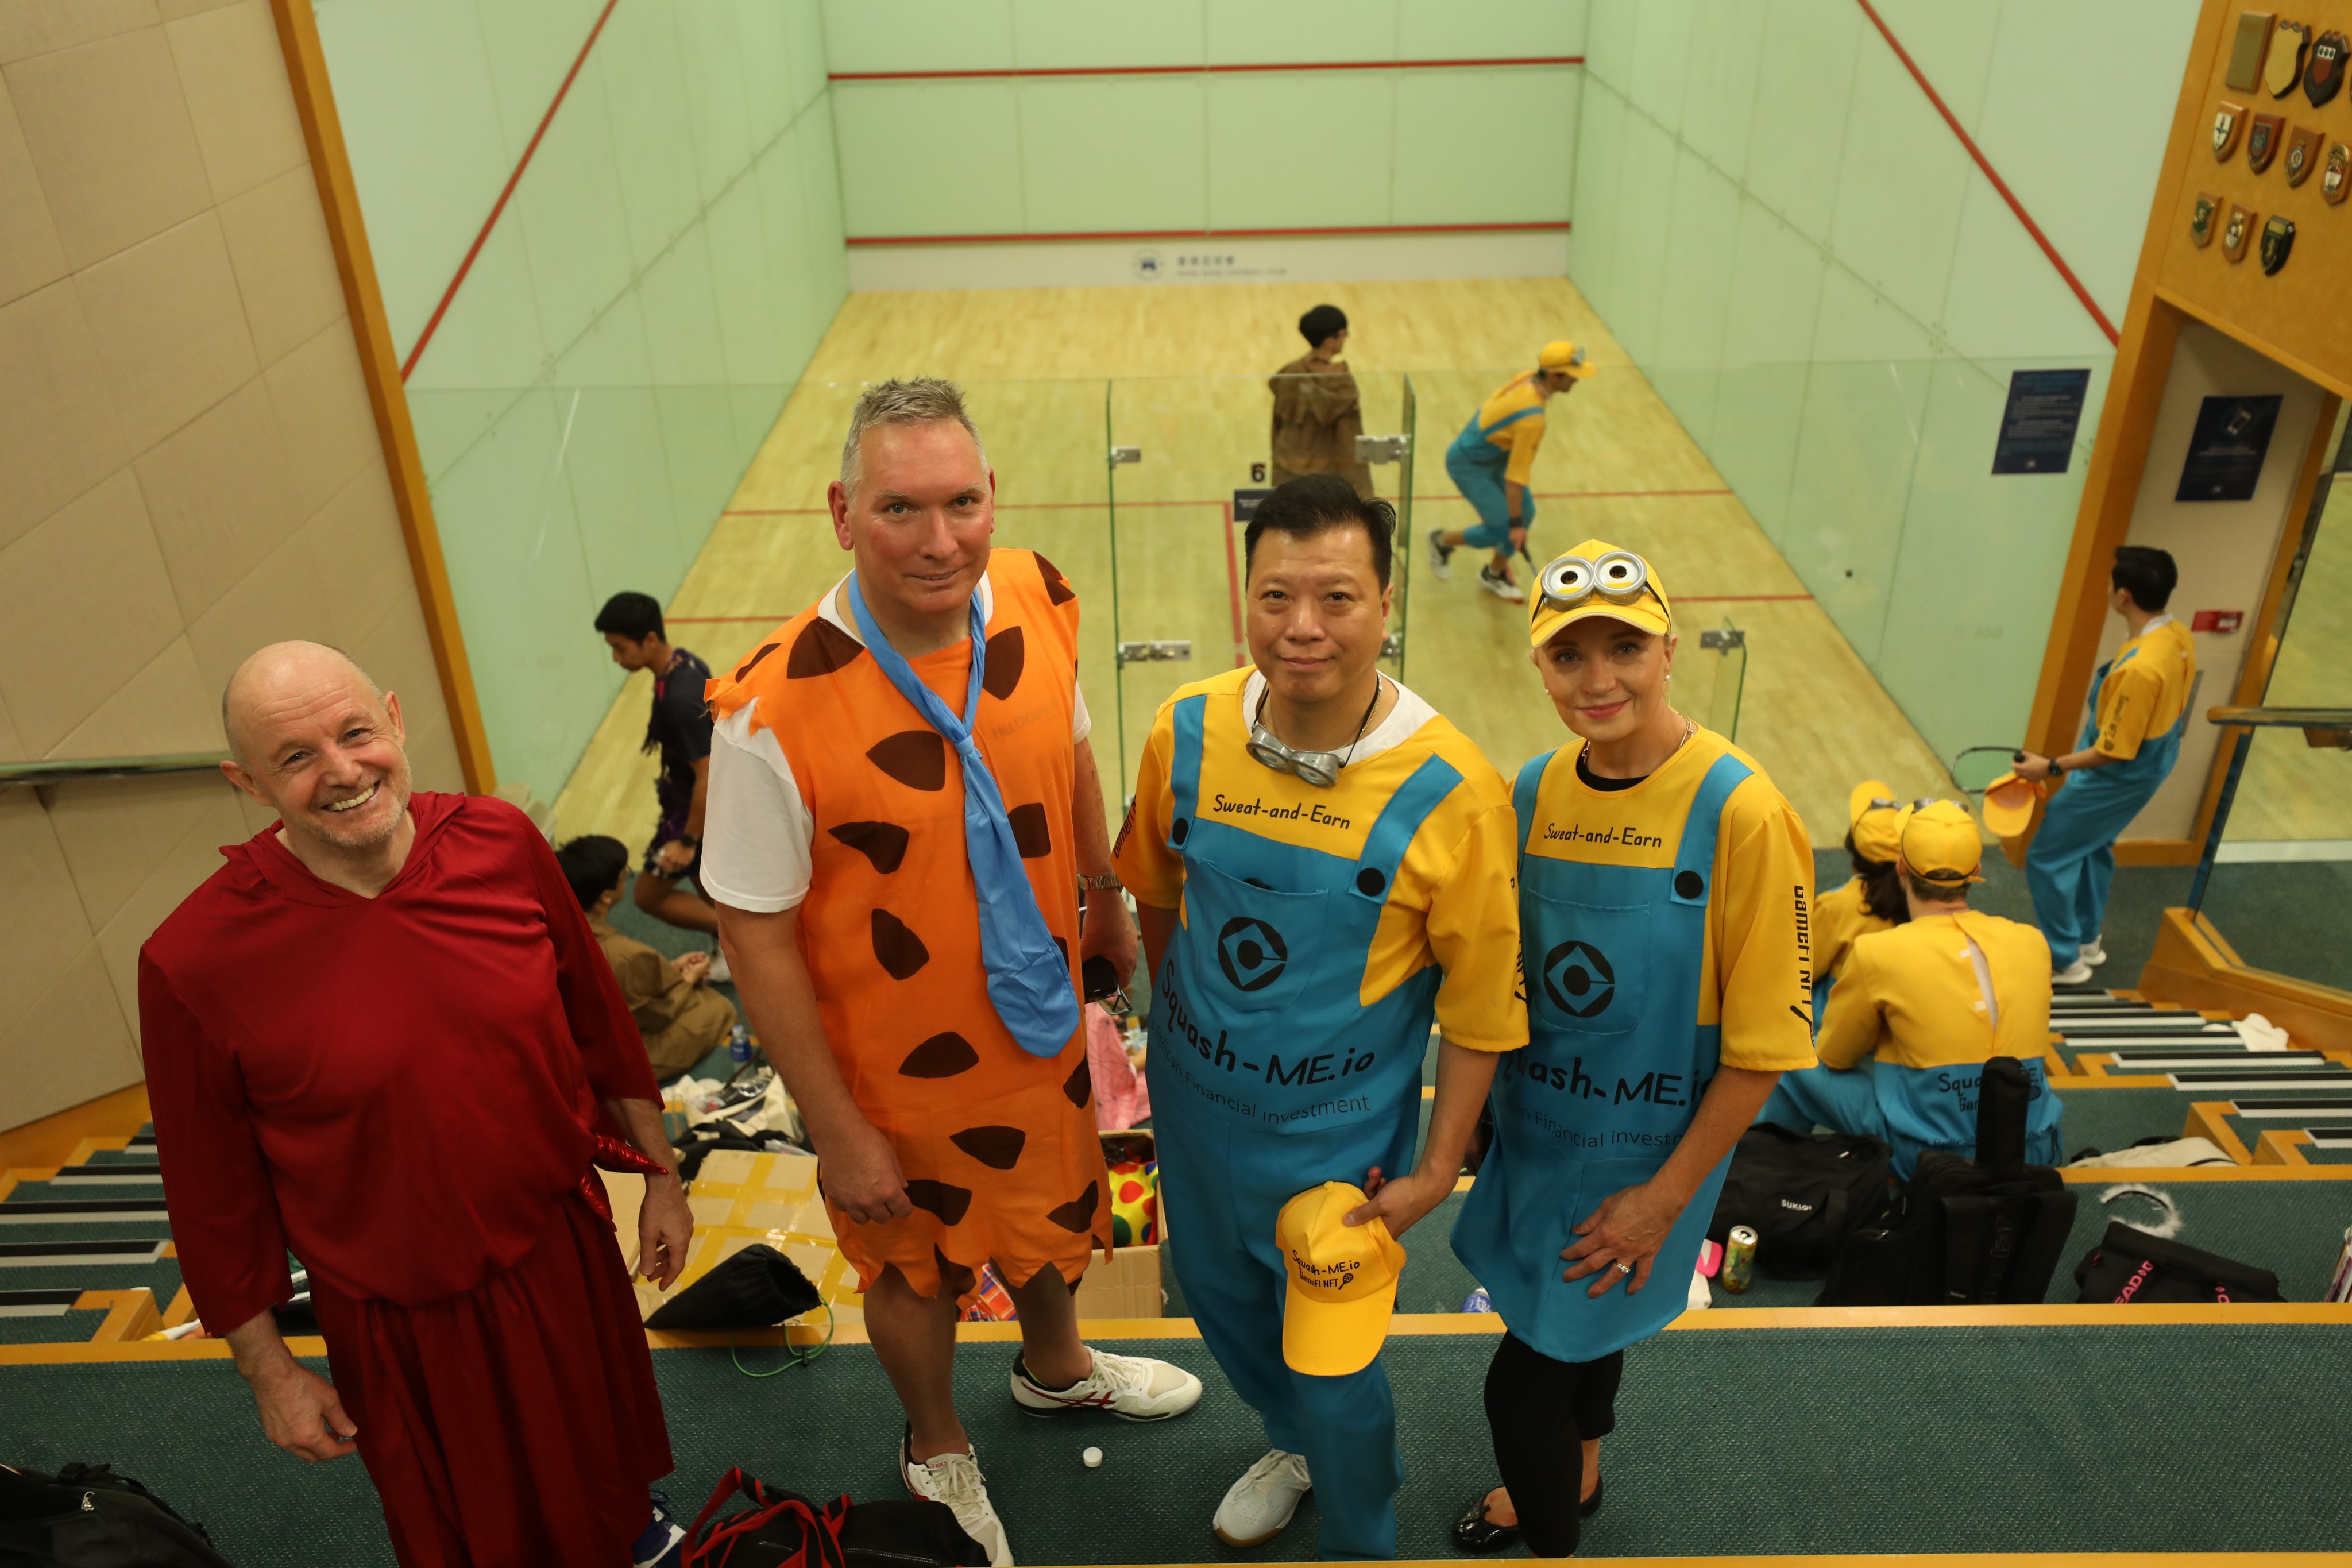 Squash players dressed up for a good cause. Photo: Xiaomei Chen